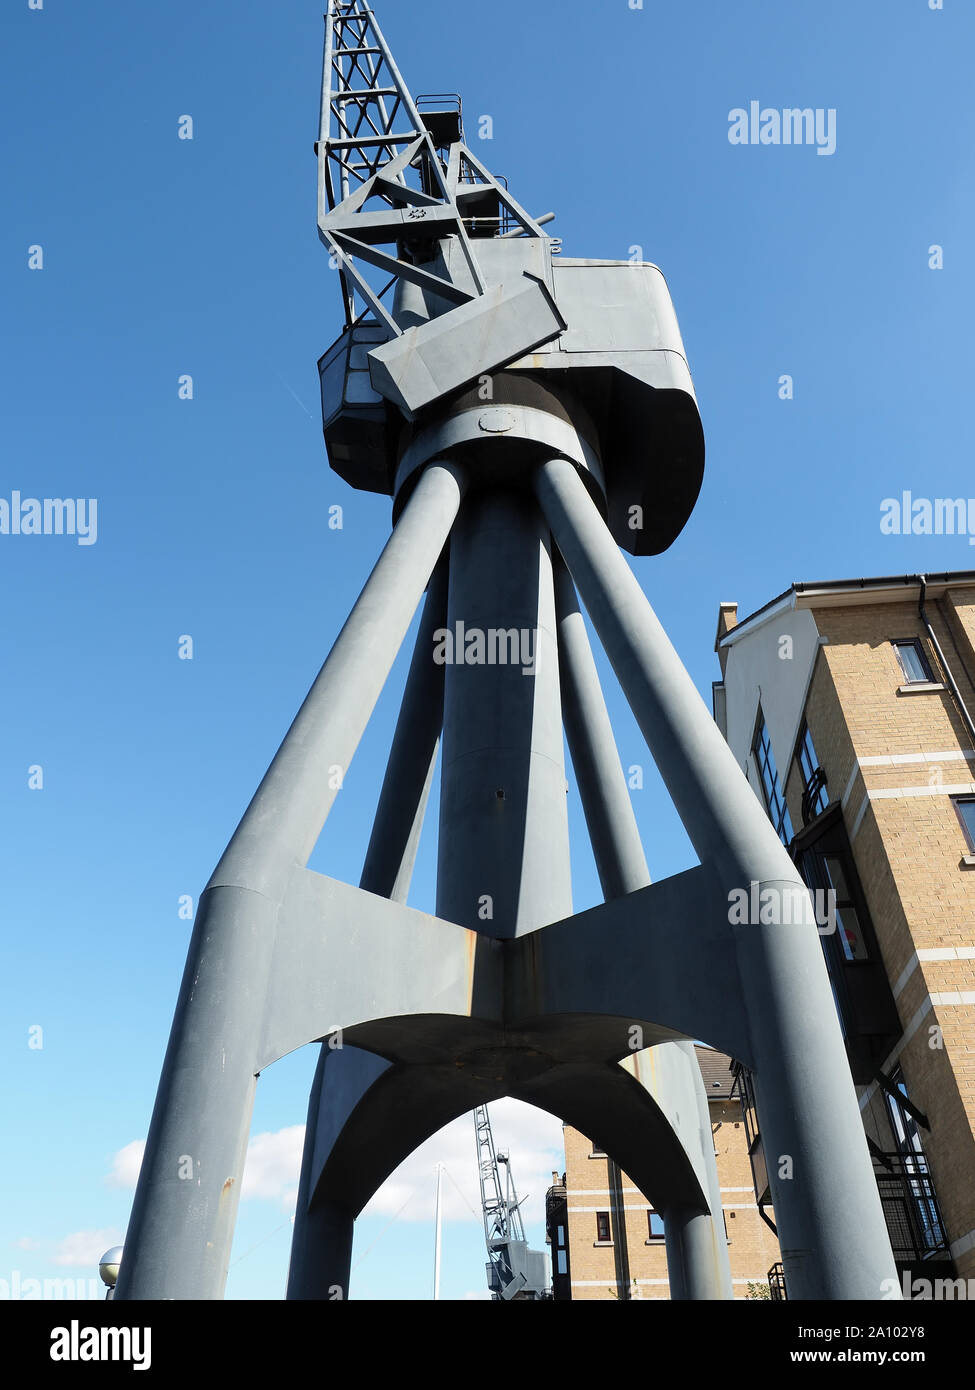 View looking up at a crane on the south side of the Royal Victoria Docks in London Stock Photo